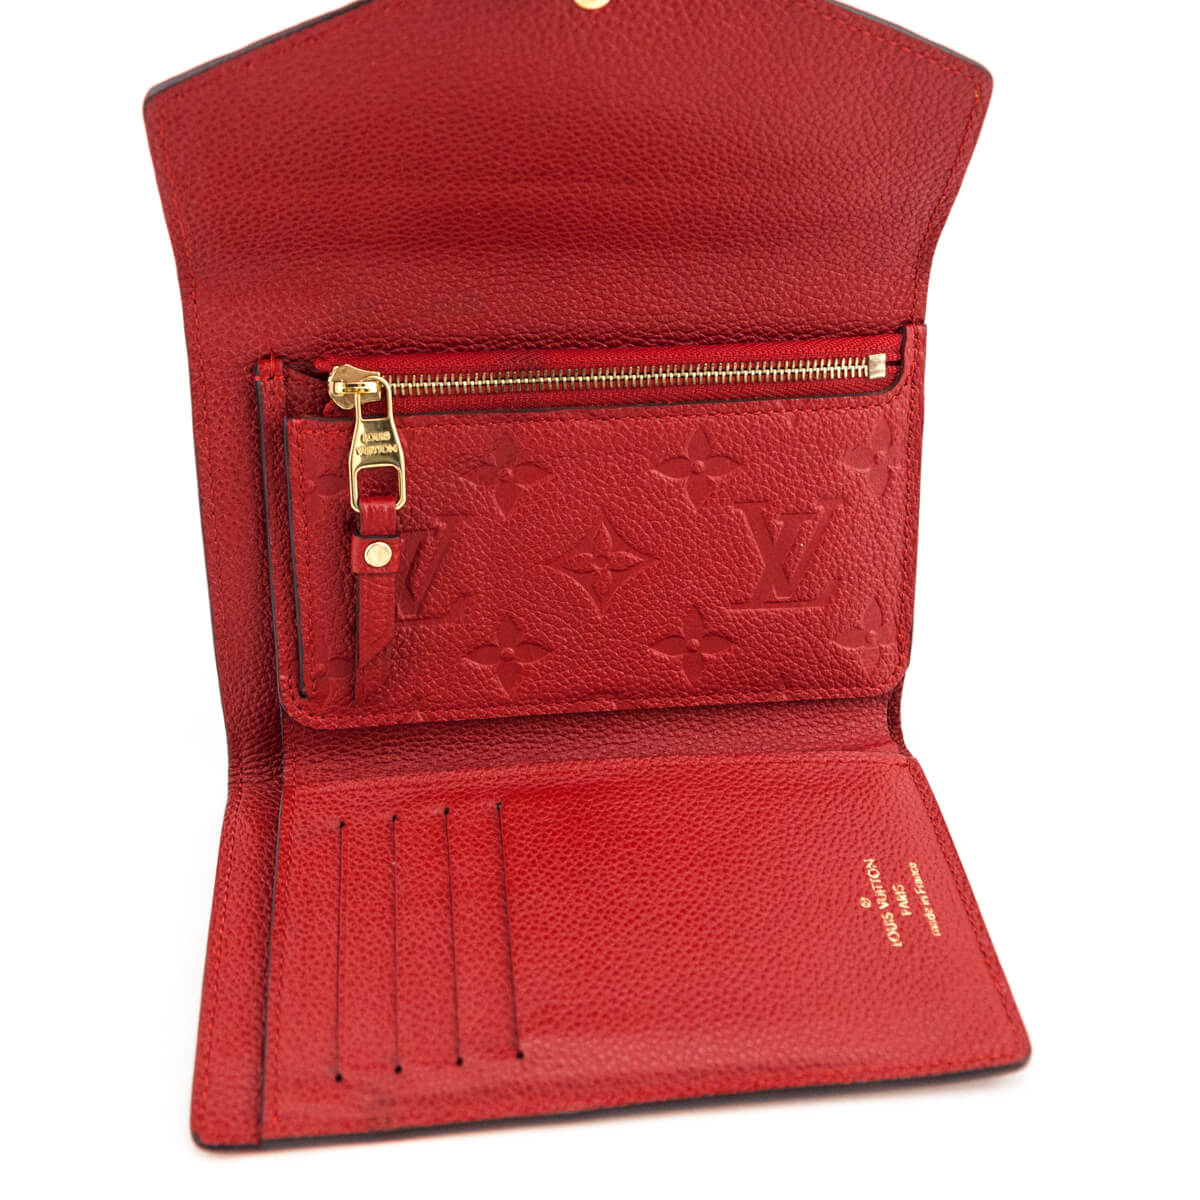 Louis Vuitton Compact Curieuse Wallet in Cerise Red Monogram